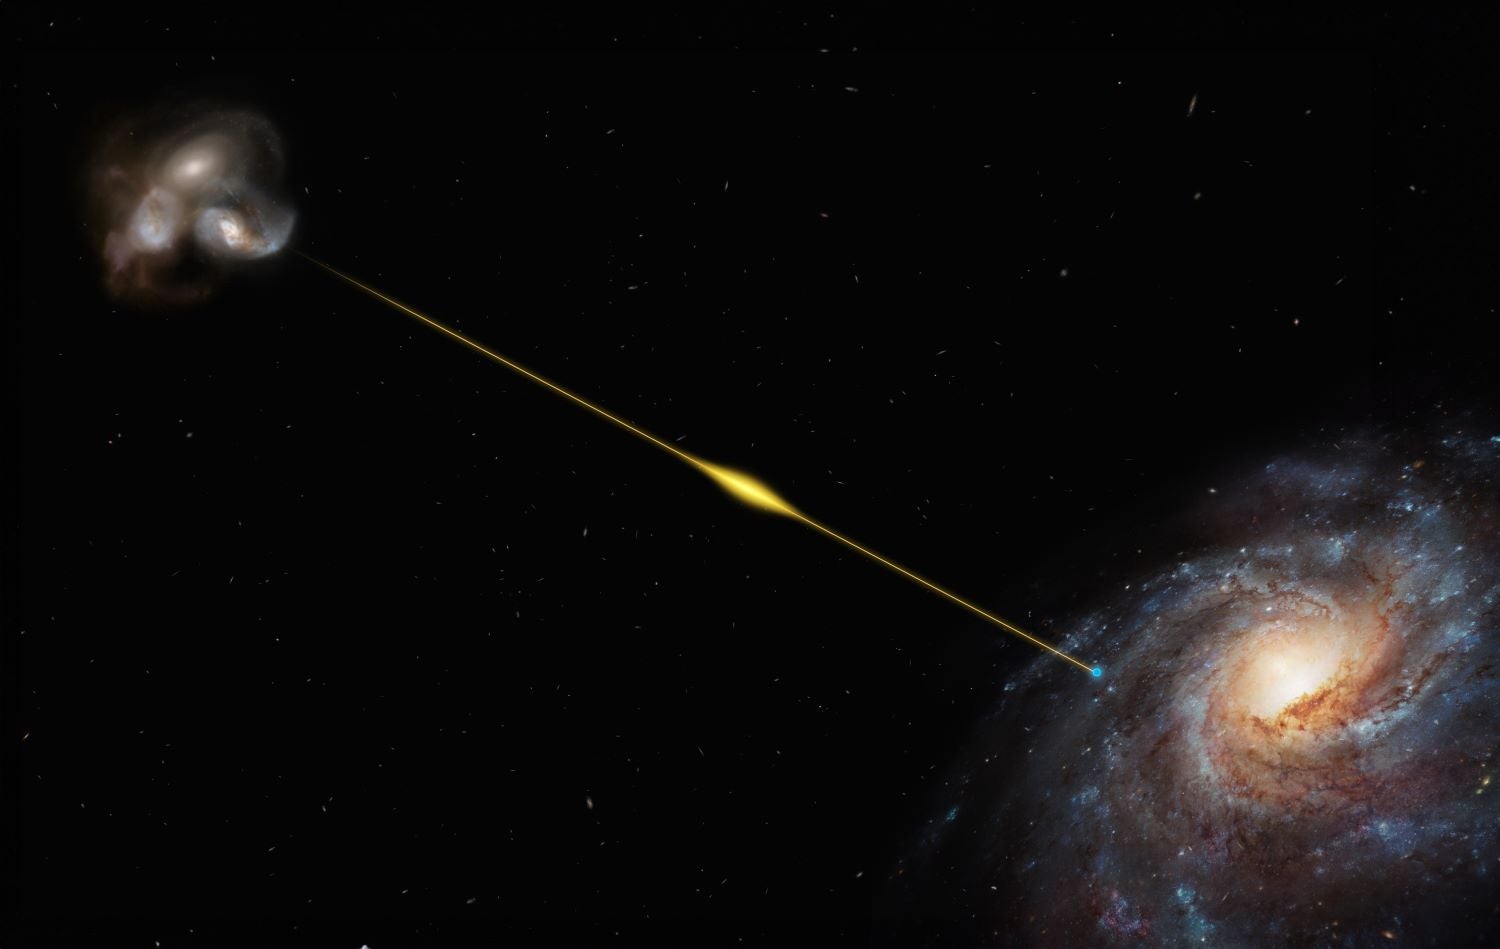 An illustrated yellow beam representing a fast radio burst connects merging galaxies to our Milky Way.